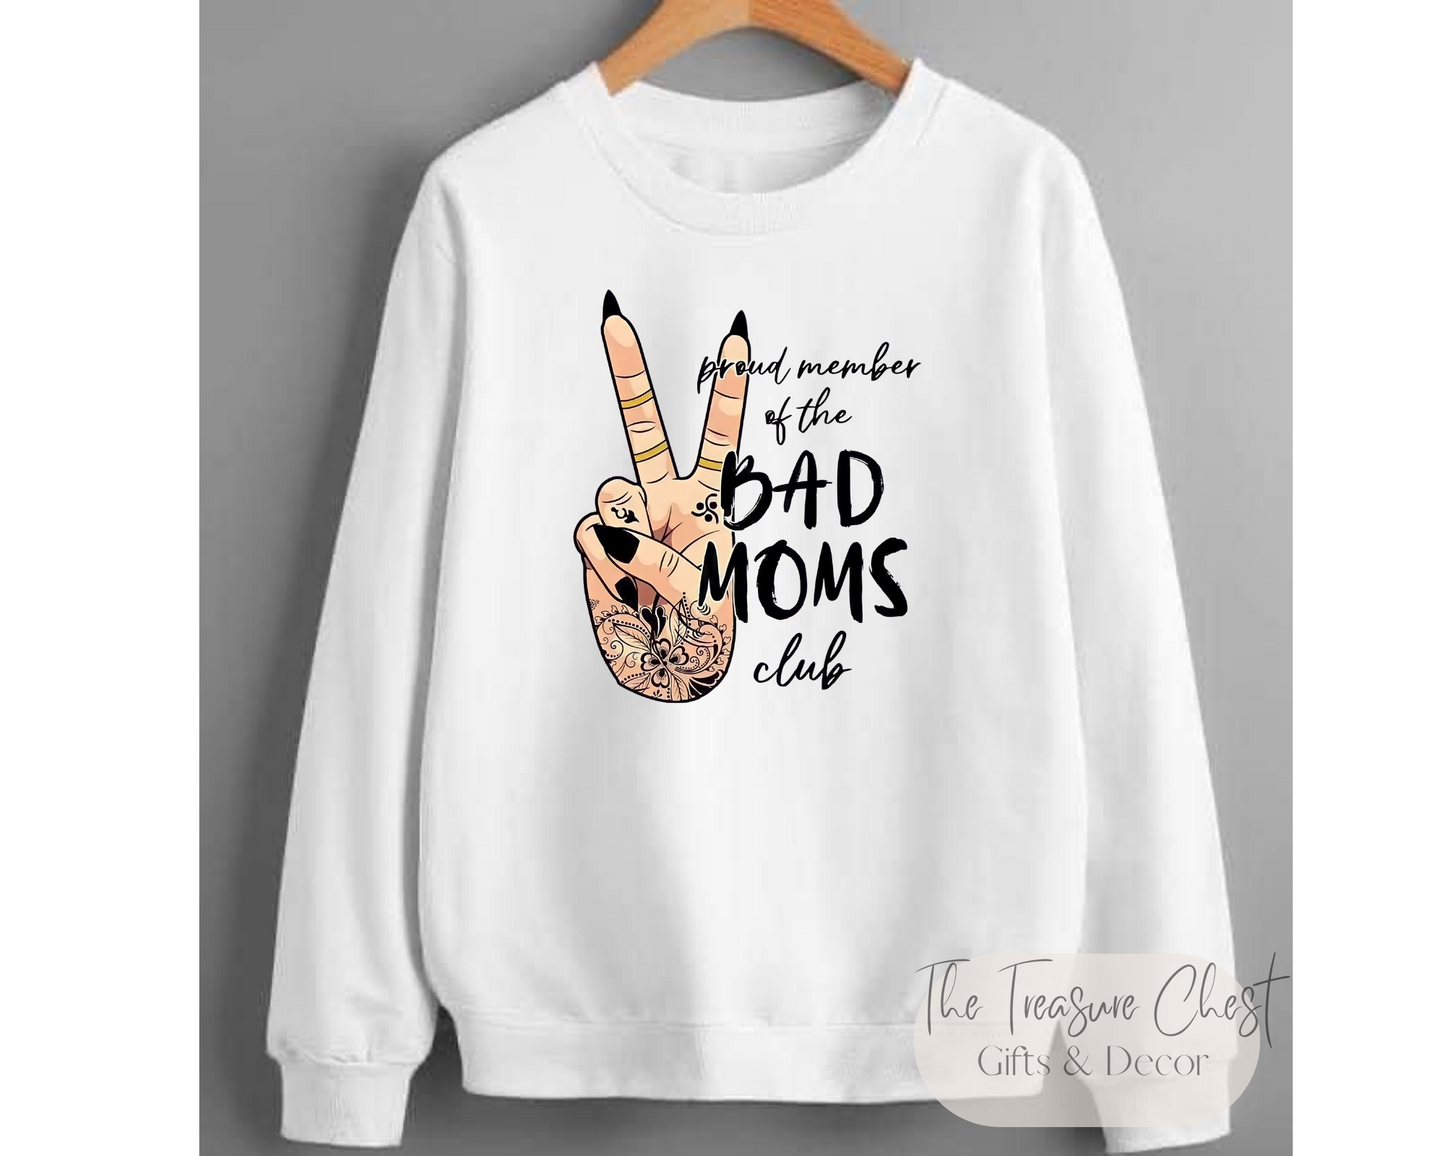 Whether you're a proud member of the Bad Mom's Club or just someone looking for a funny graphic sweatshirt to add to your wardrobe, look no further than our Bad Mom's Club crewneck sweatshirt. Featuring a hand peace sign graphic and quote.  Our sweatshirts are made of a heavy, yet soft and breathable material that maintains it's shape and size. Pair it with your favourite jeans or joggers for a casual look.White in colour